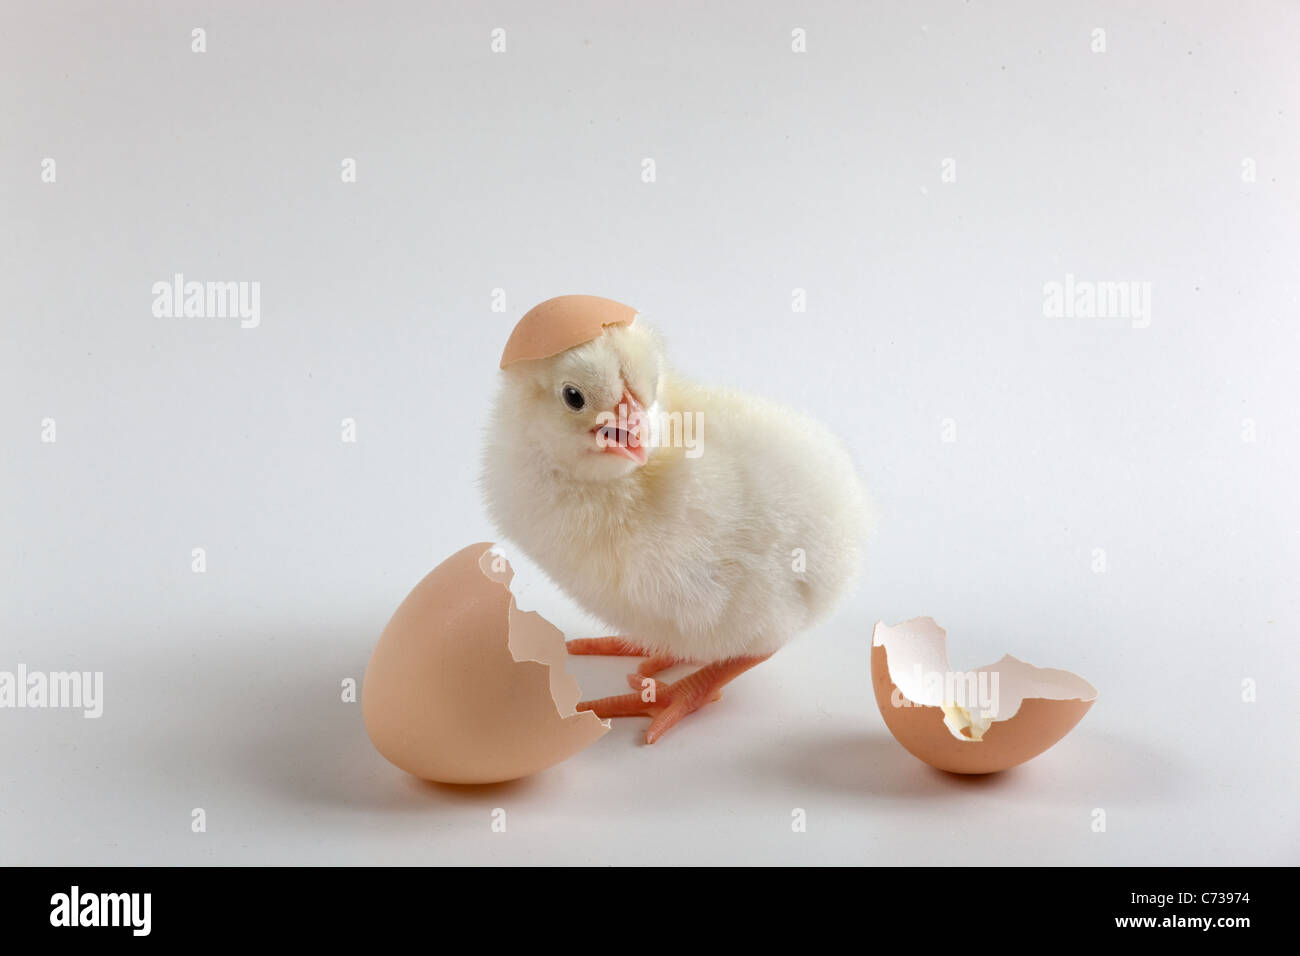 newly hatched Dayold Chick and eggshells Stock Photo